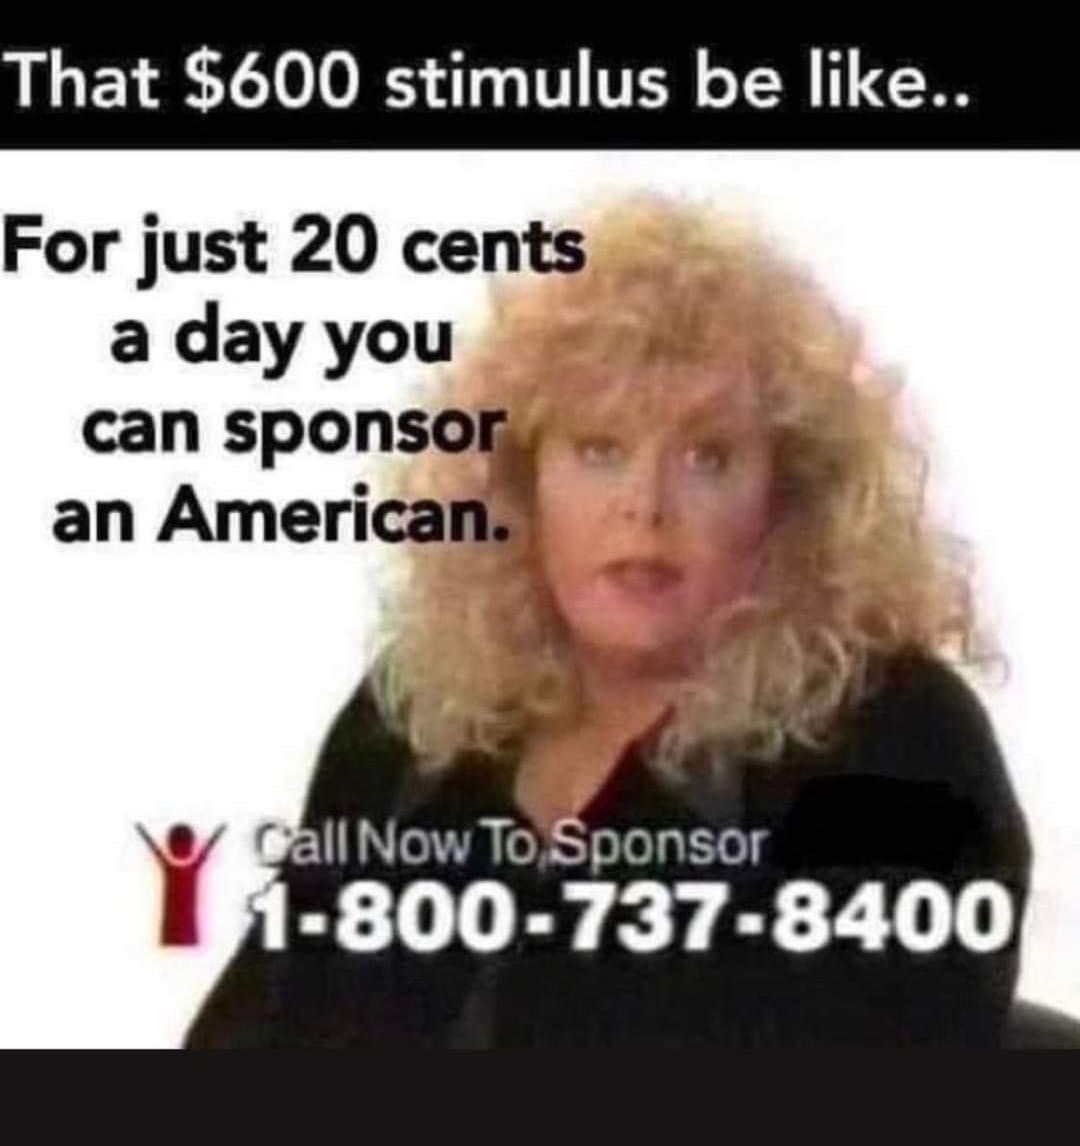 just dial - That $600 stimulus be .. For just 20 cents a day you can sponsor an American. Call Now To Sponsor 18007378400